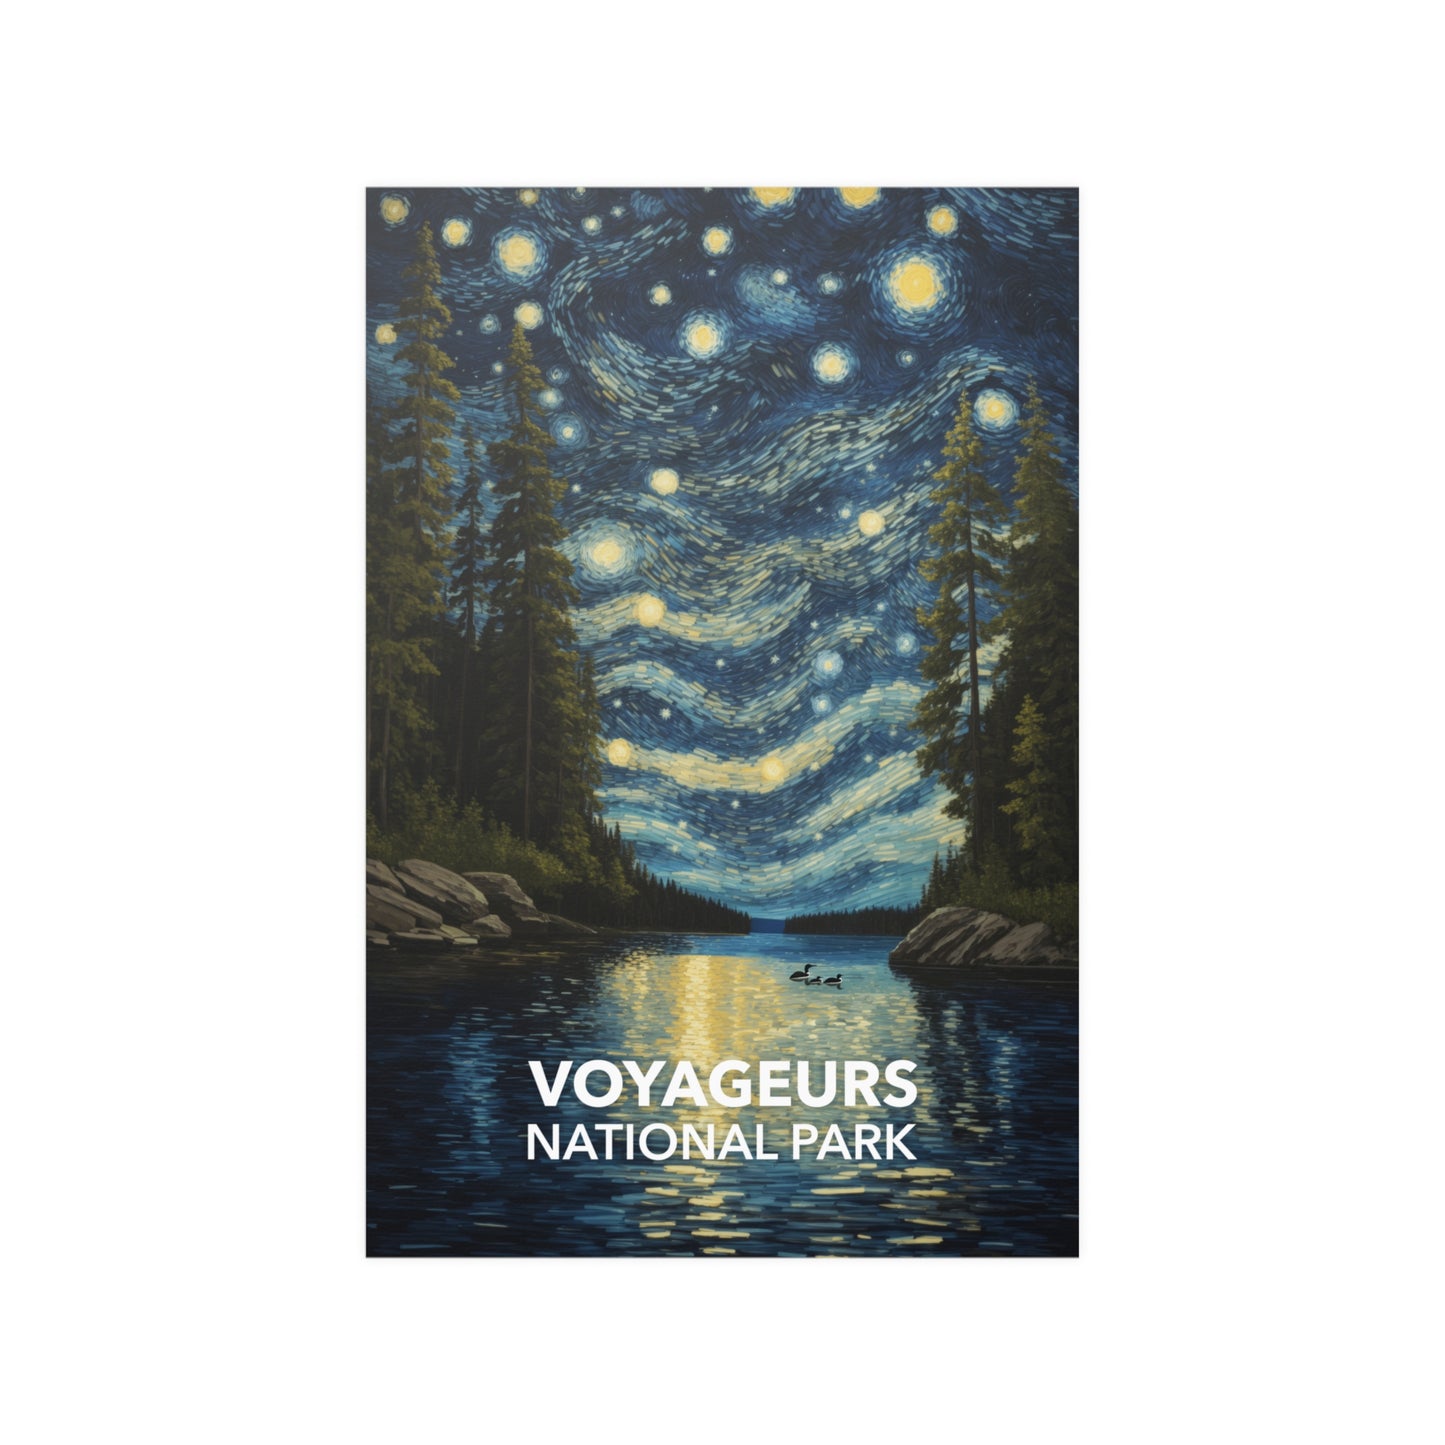 Voyageurs National Park Poster - Starry Night